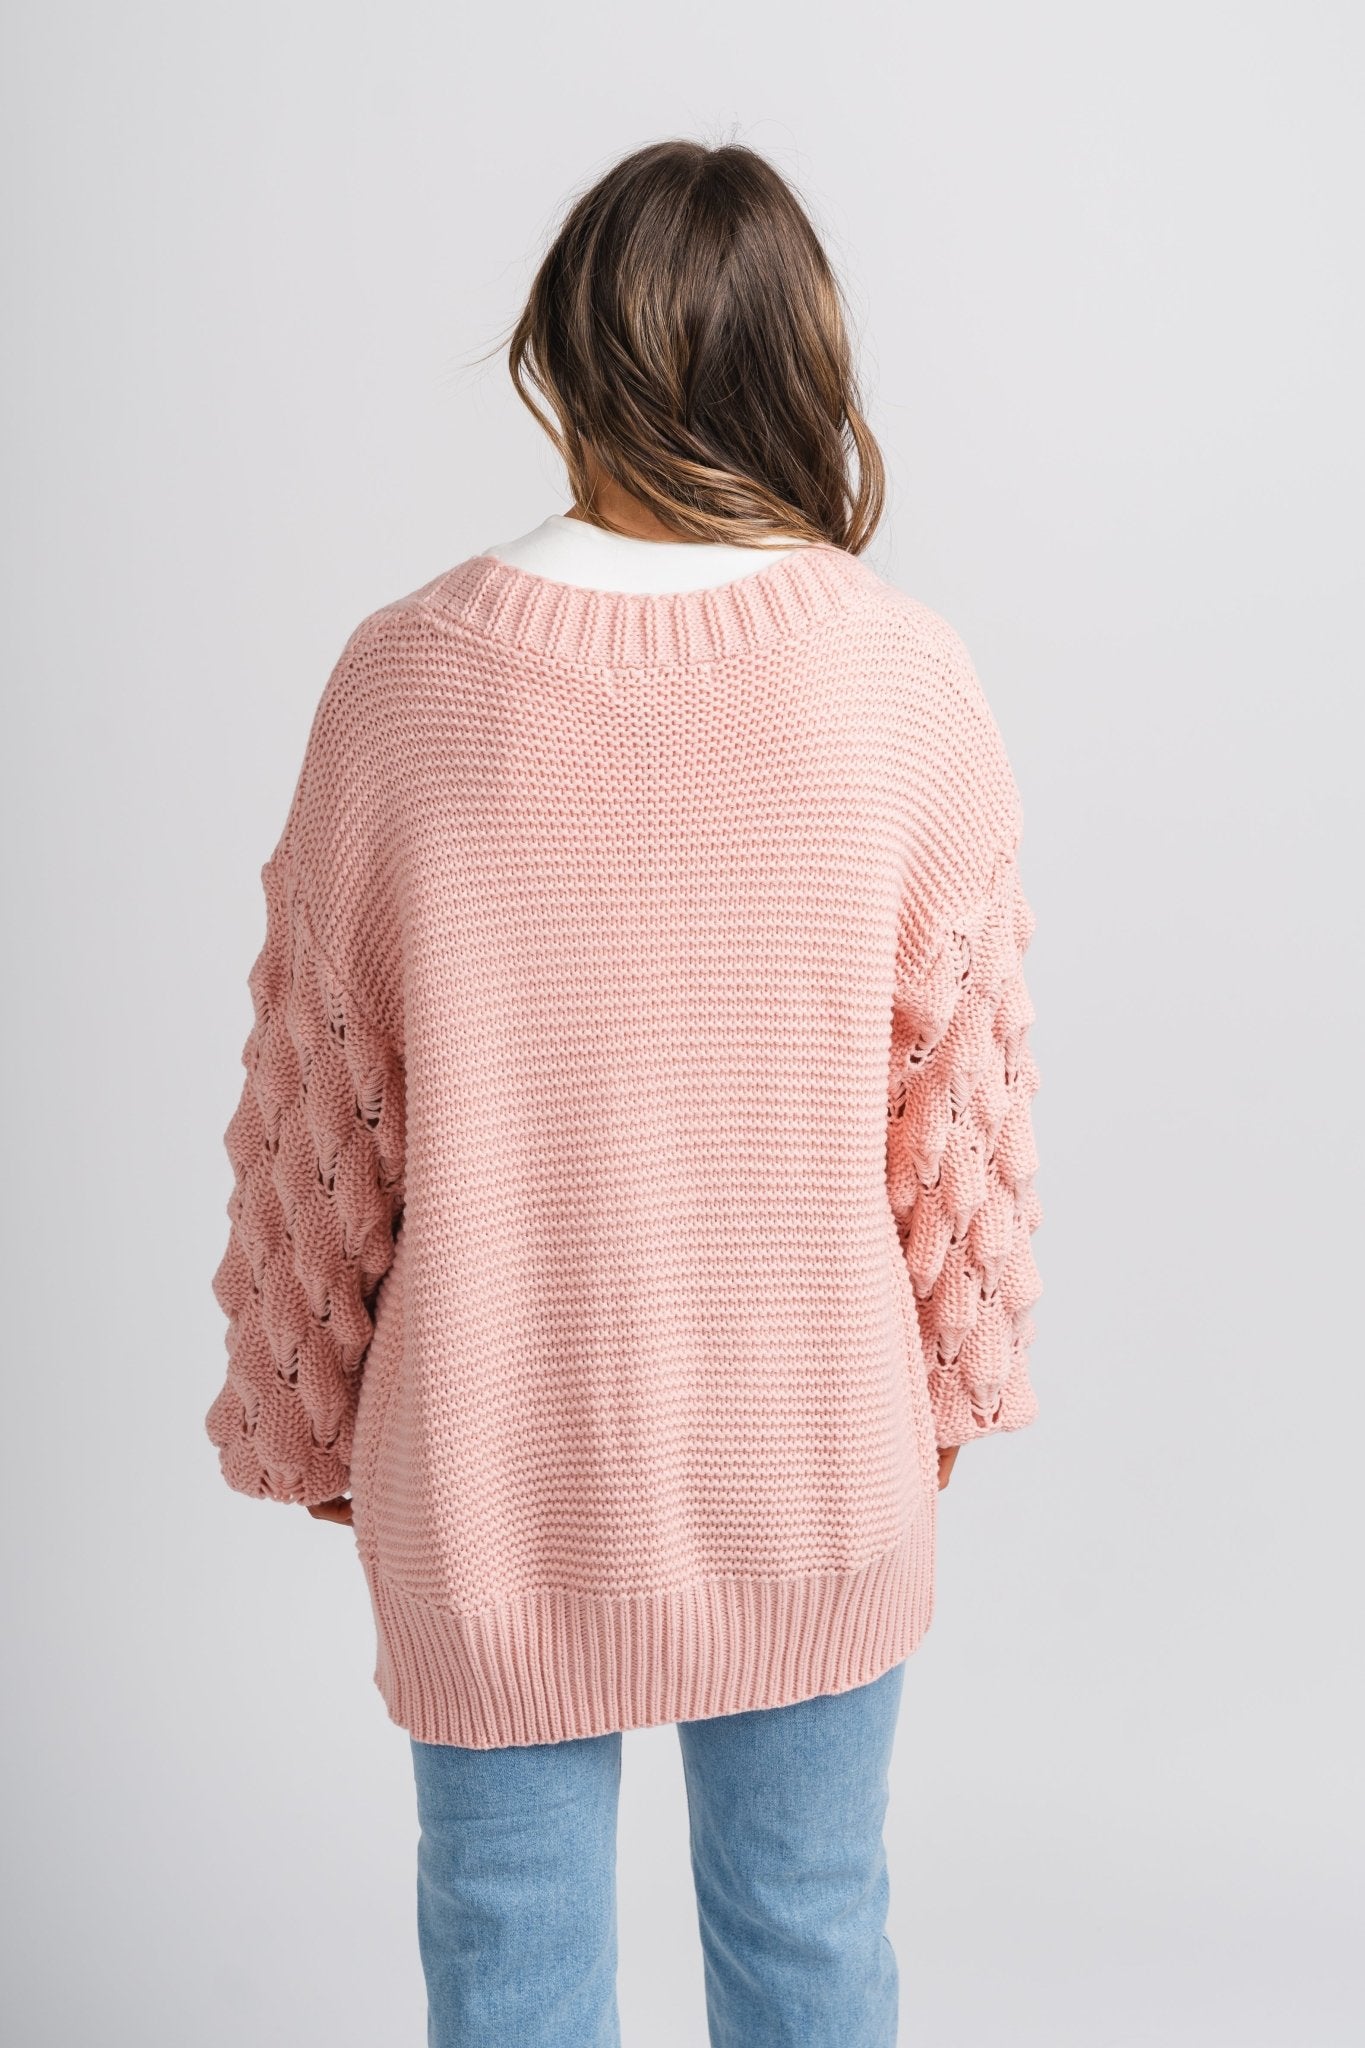 Bubble sleeve cardigan blush - Affordable Cardigan - Unique Easter Style at Lush Fashion Lounge Boutique in Oklahoma